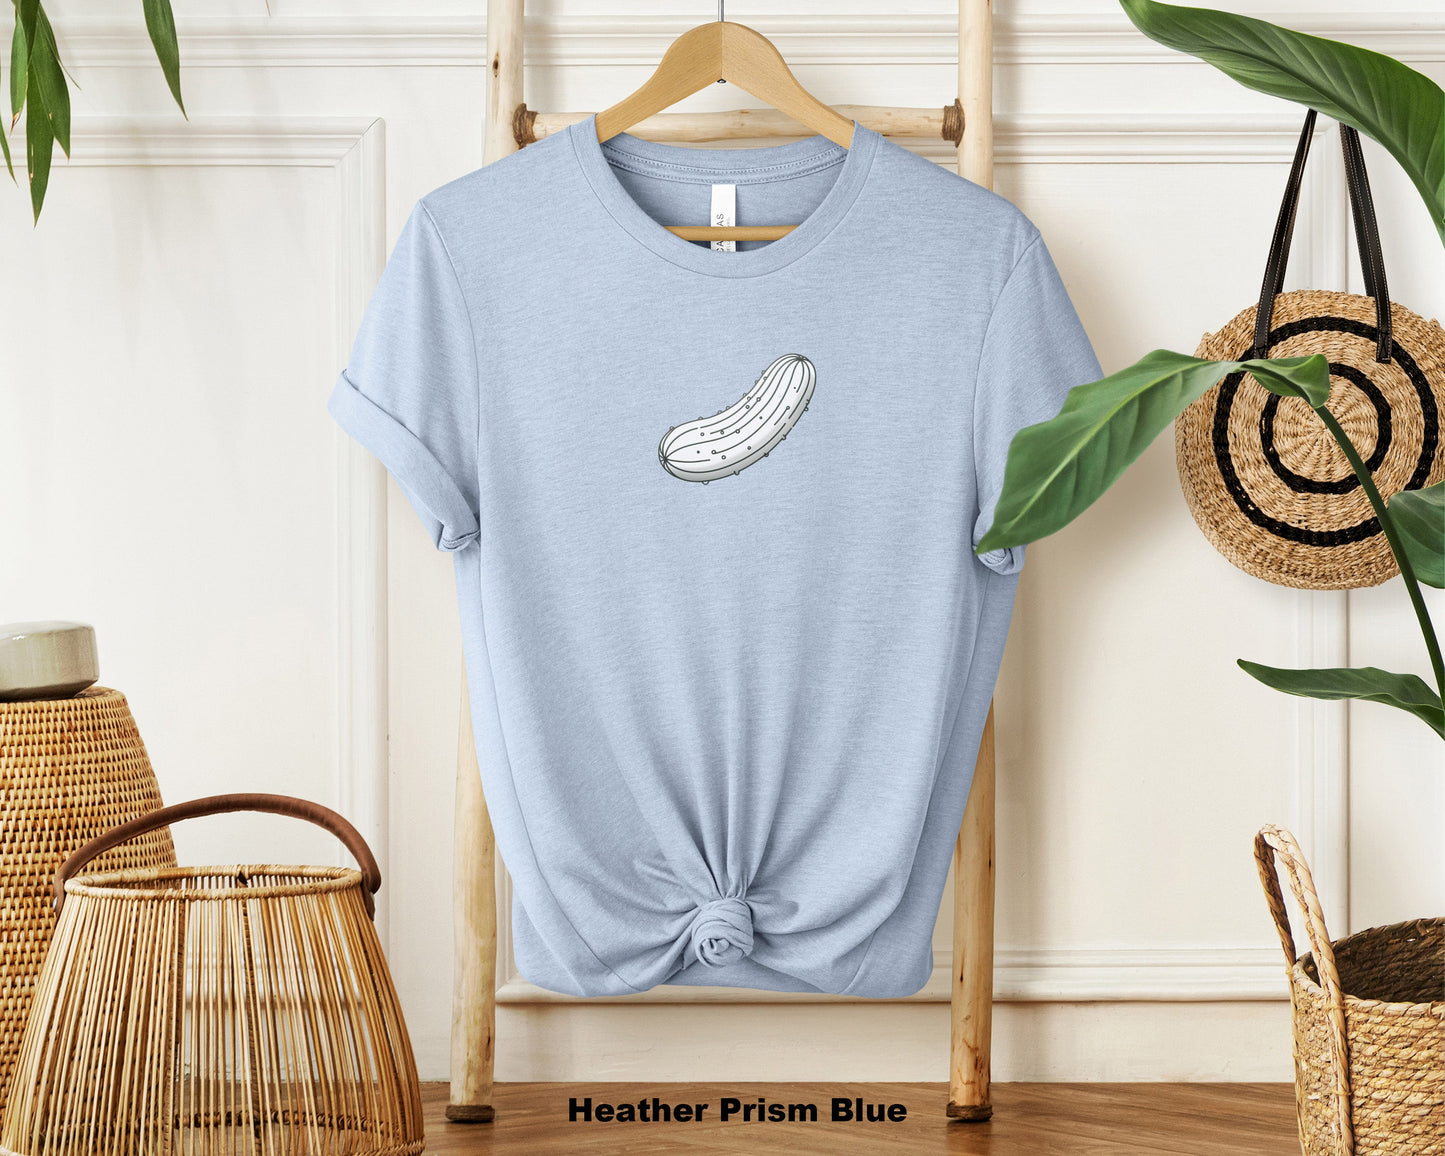 Pickle Power Crewneck Tee - Playful Pickle Graphic Shirt for Food Enthusiasts